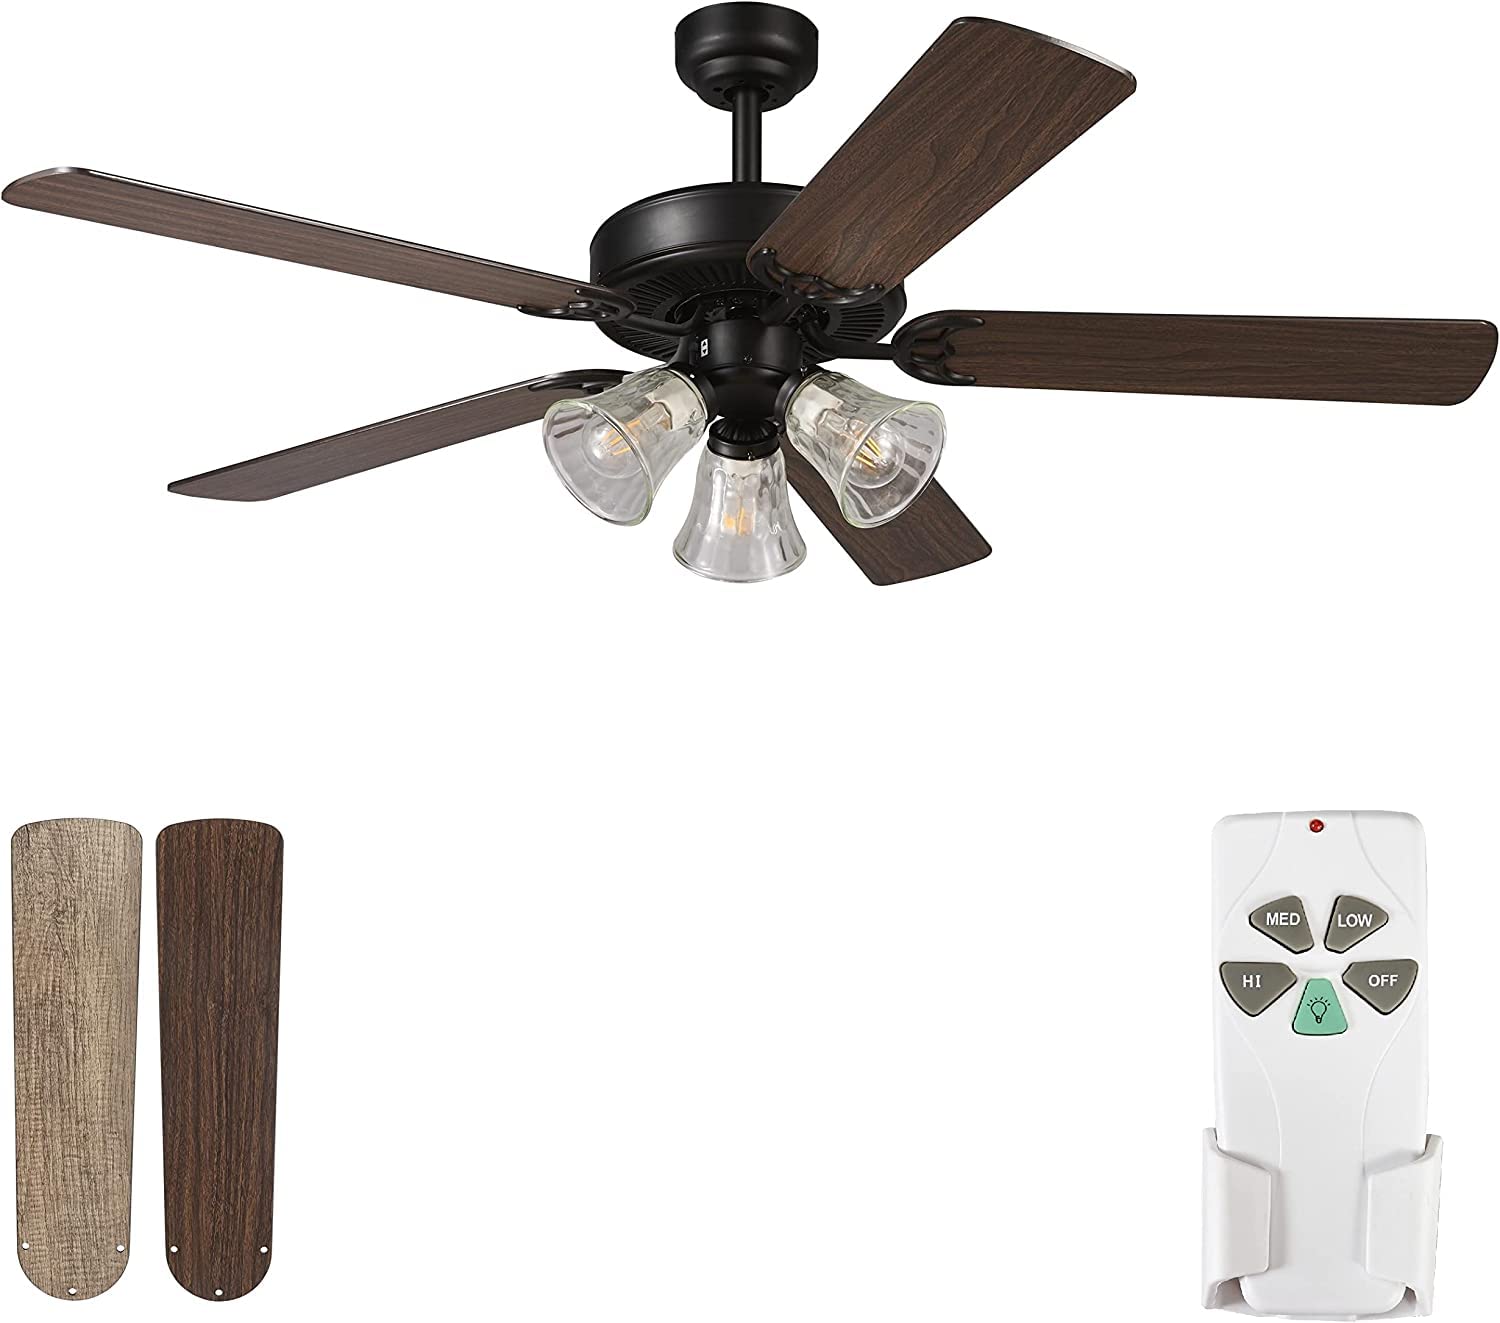 BiGizmos Ceiling Fan with Light and Remote Control